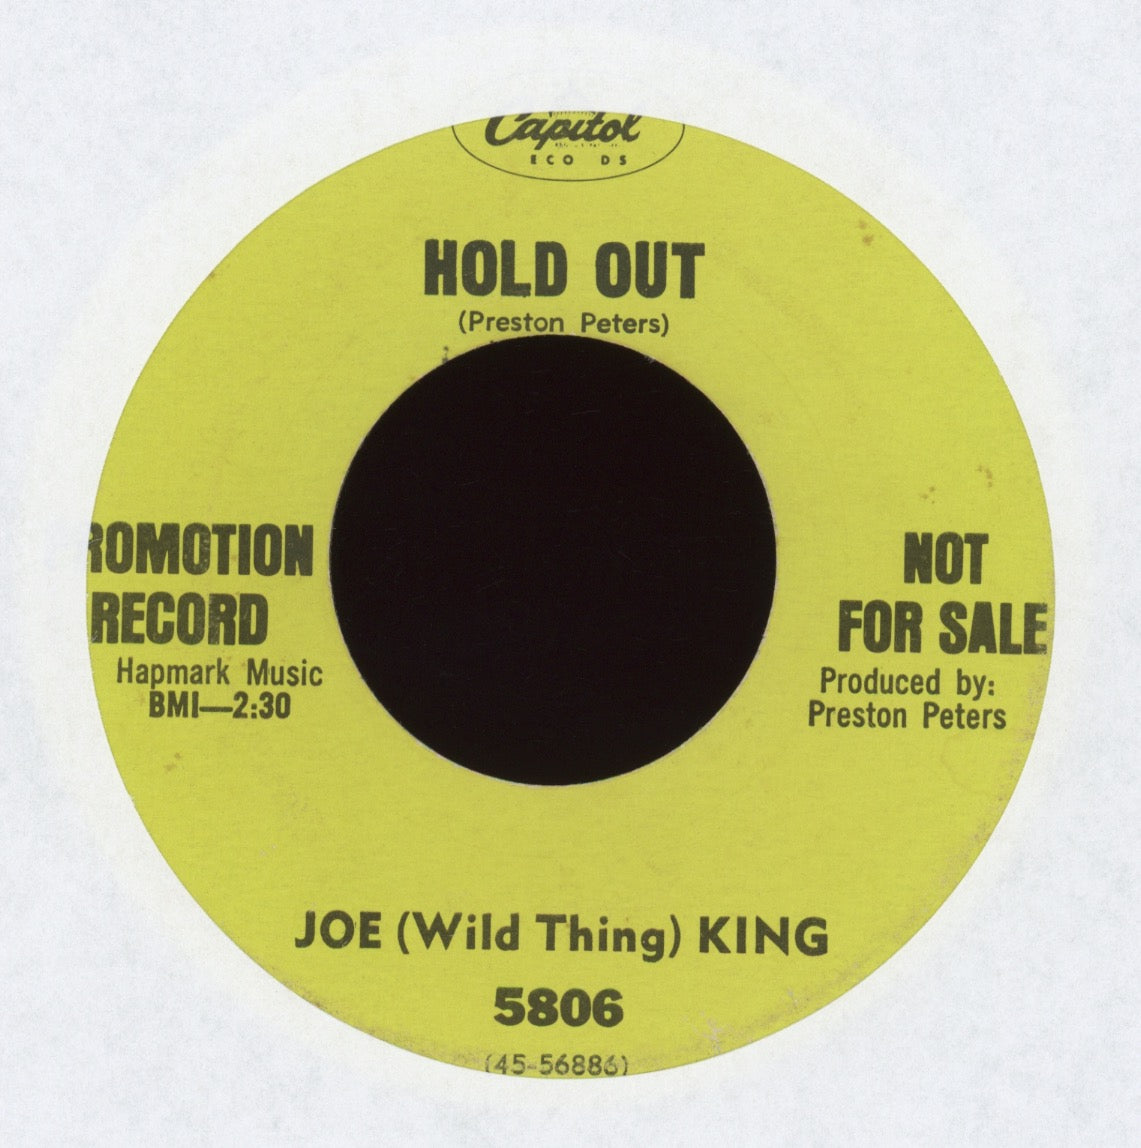 Joe (Wild Thing) King - Hold Out on Capitol Promo